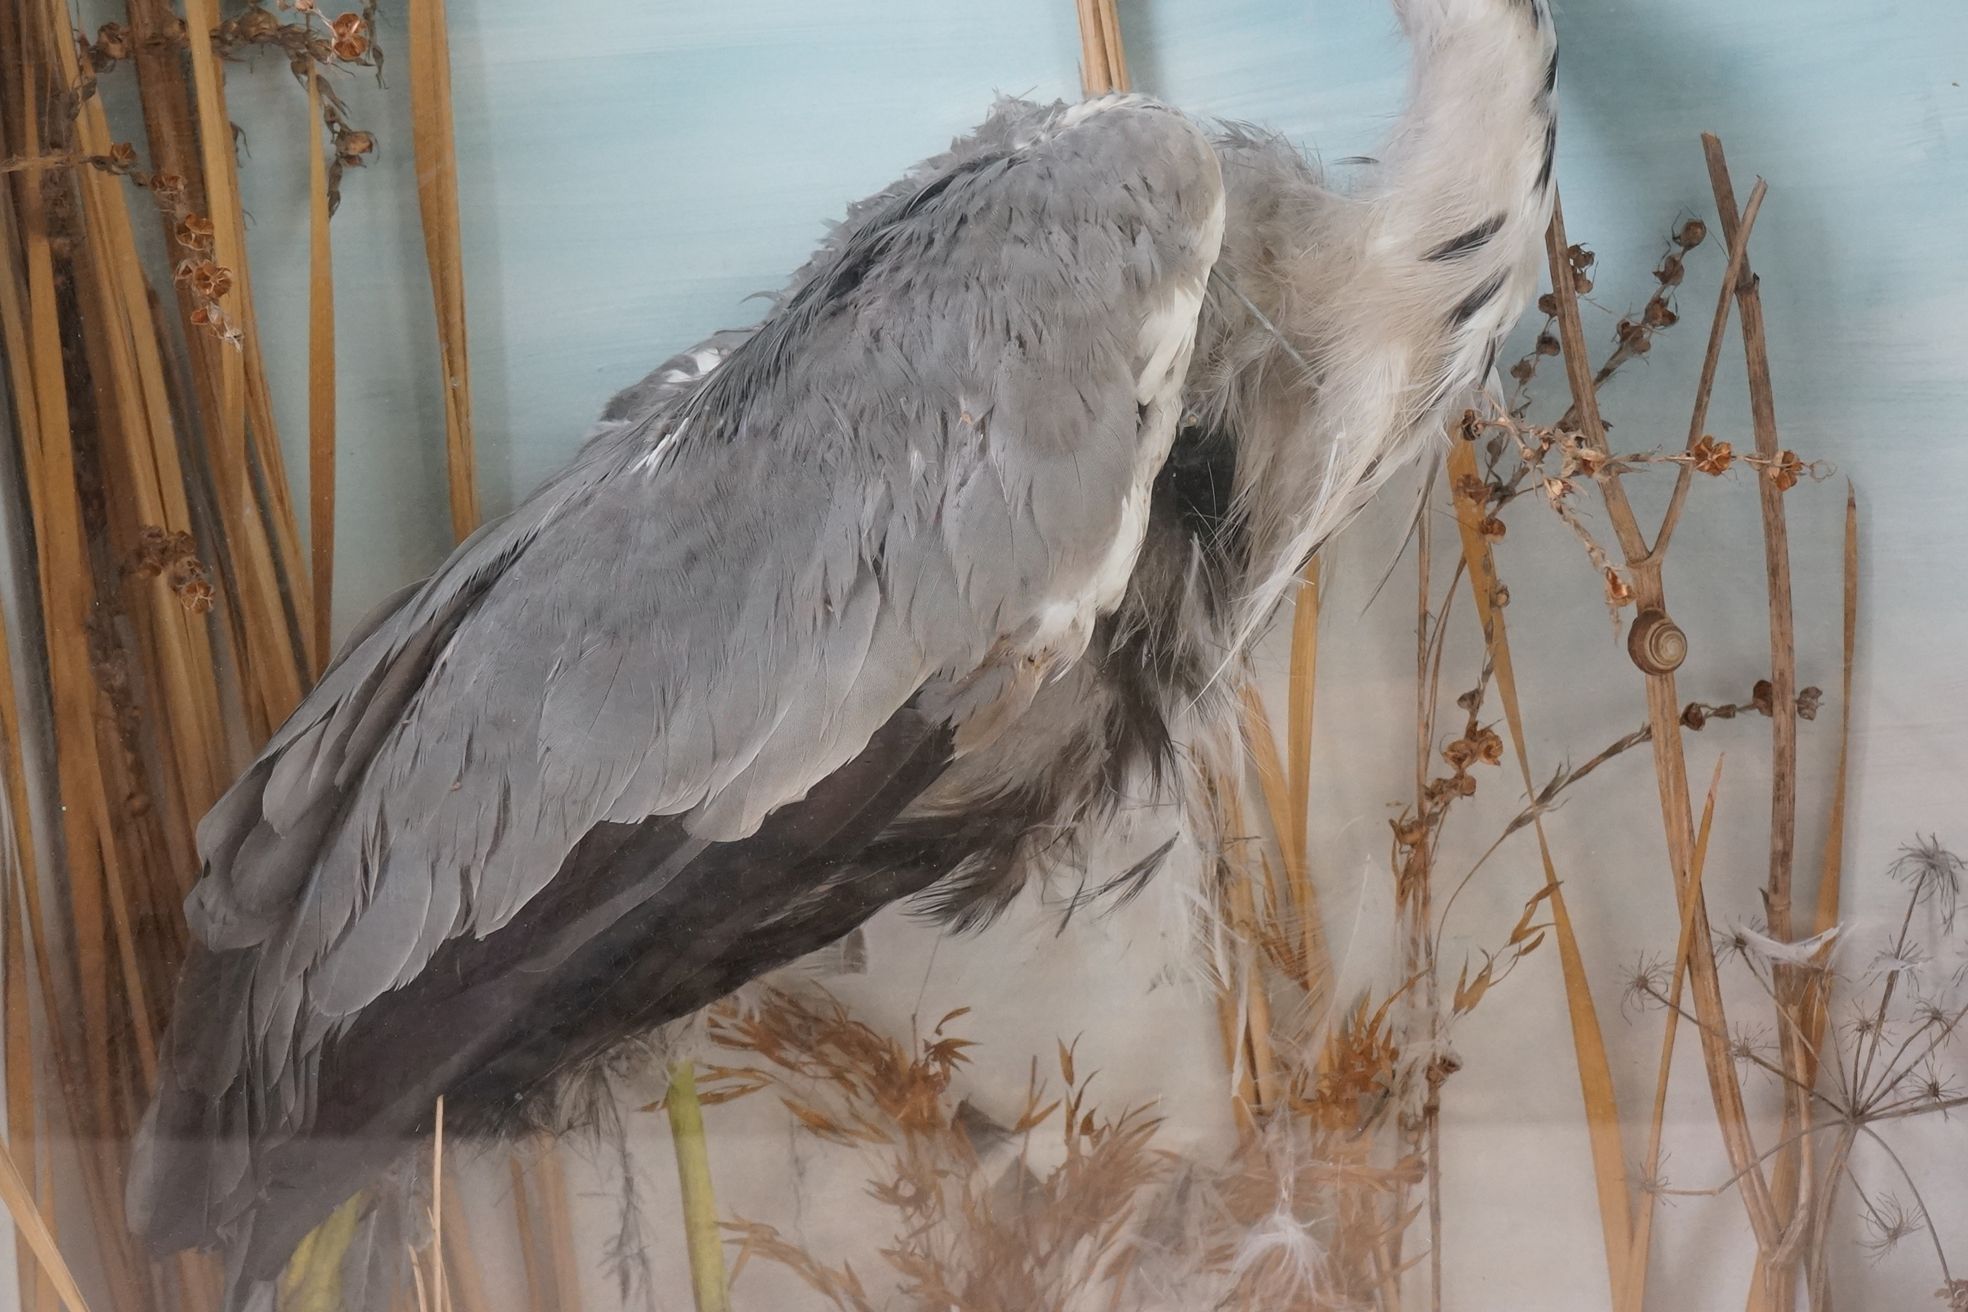 Taxidermy - Standing Heron mounted amongst natural foliage, contained in a glass fronted display - Image 3 of 8